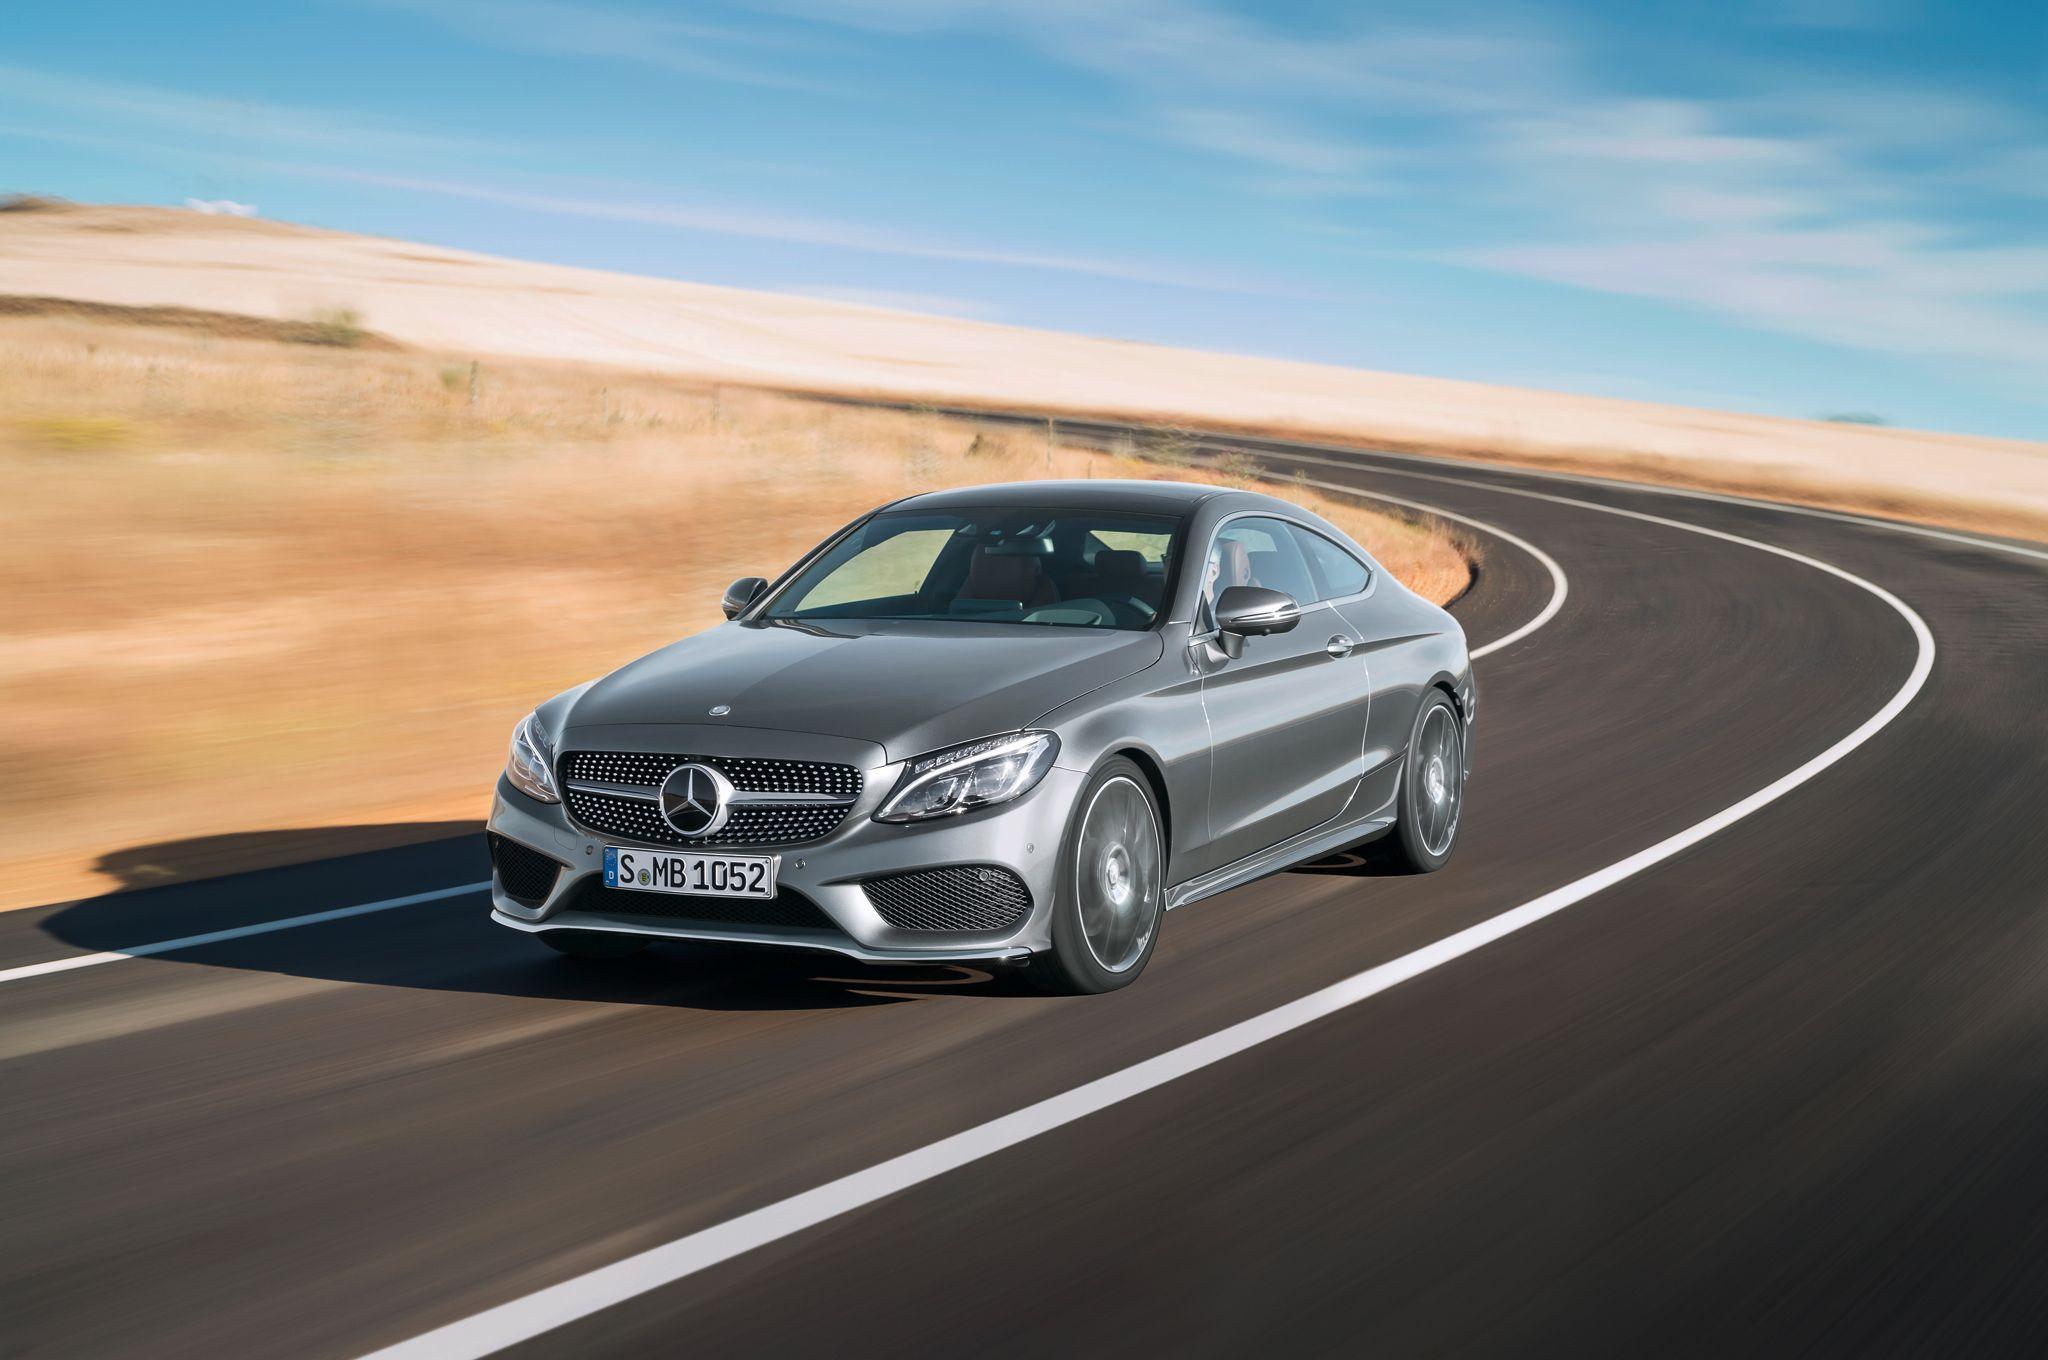 Mercedes Benz C Class Coupe 2017 HD Wallpaper Free Download